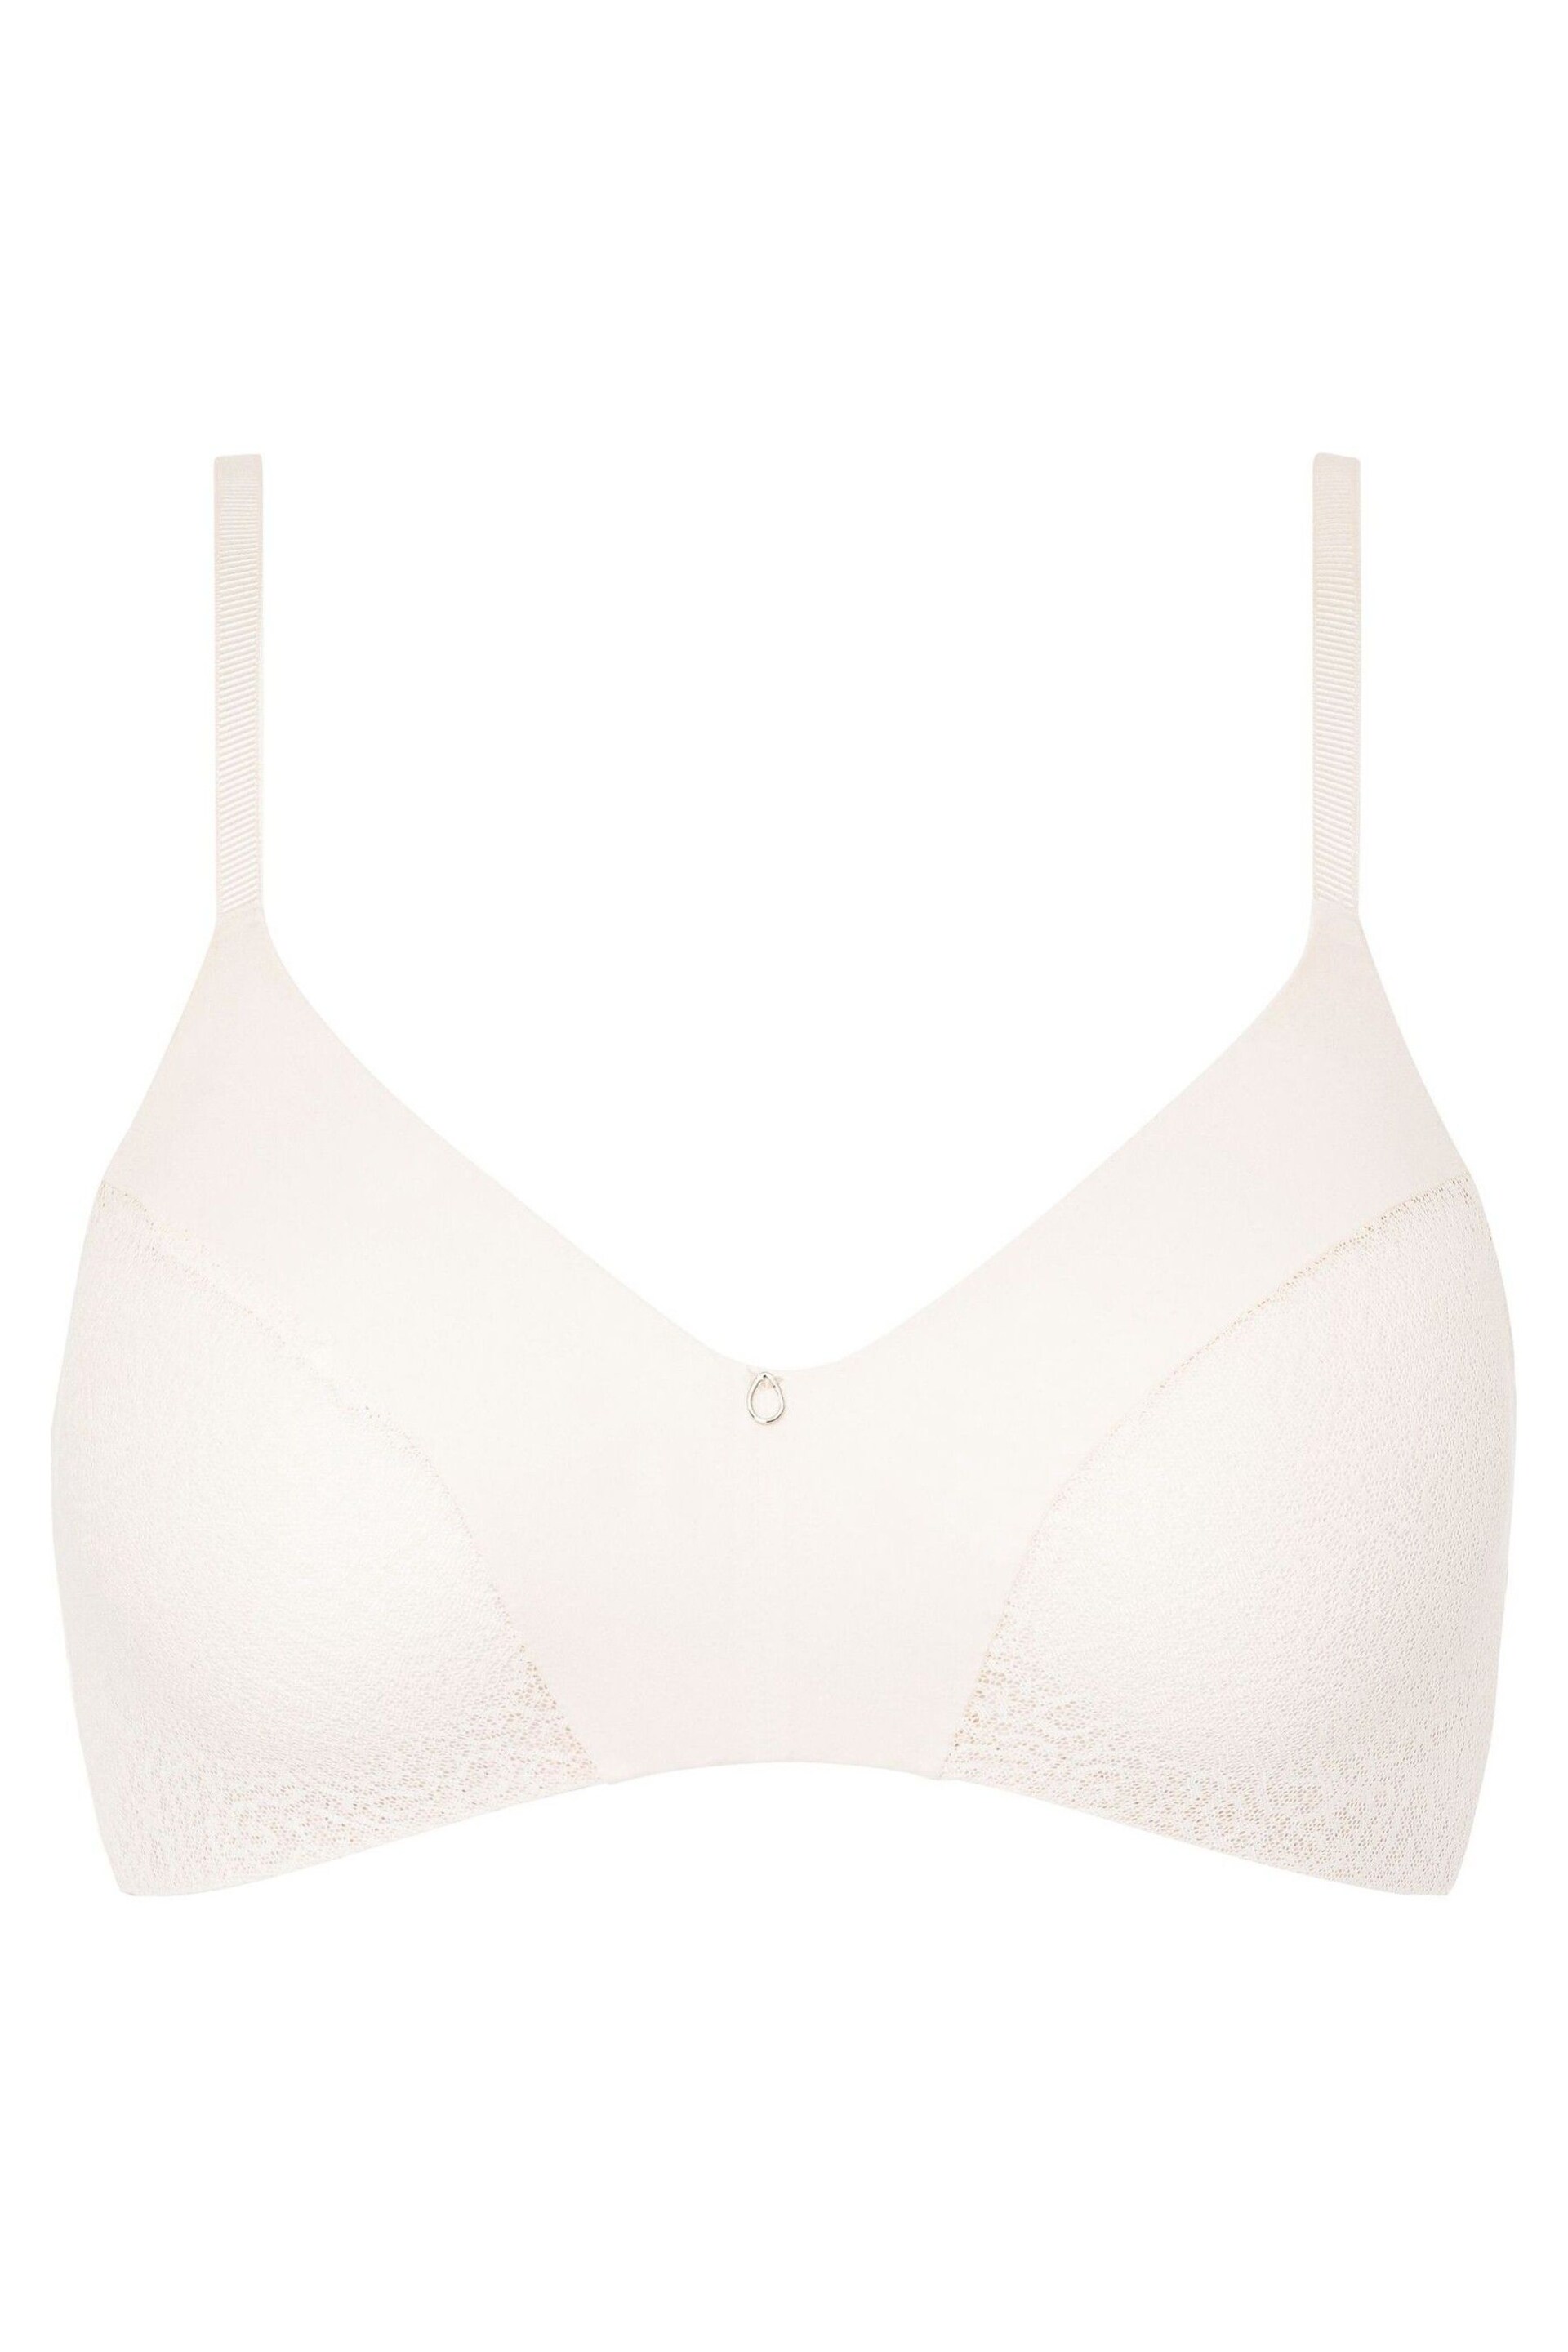 Chantelle Cloudia Soft Feel Non Wired T-Shirt Bra - Image 3 of 3